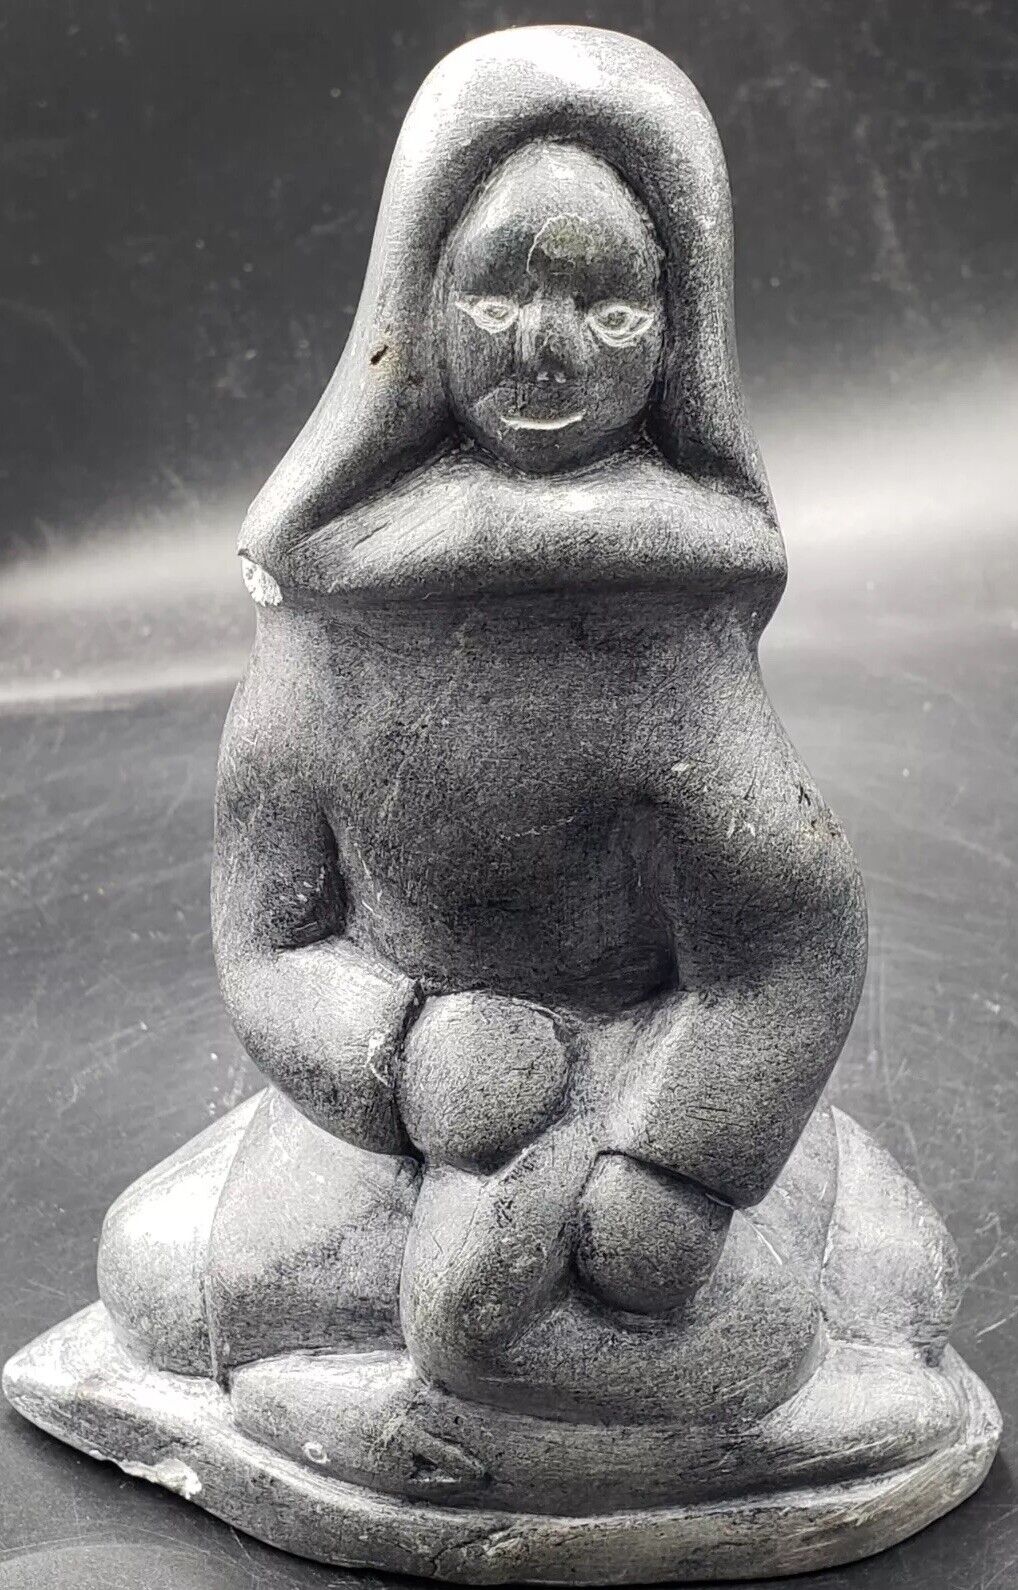 Inuit Soapstone Carving Of An Inuit Woman, Signed “Eskimo Art” 6.5 Inches